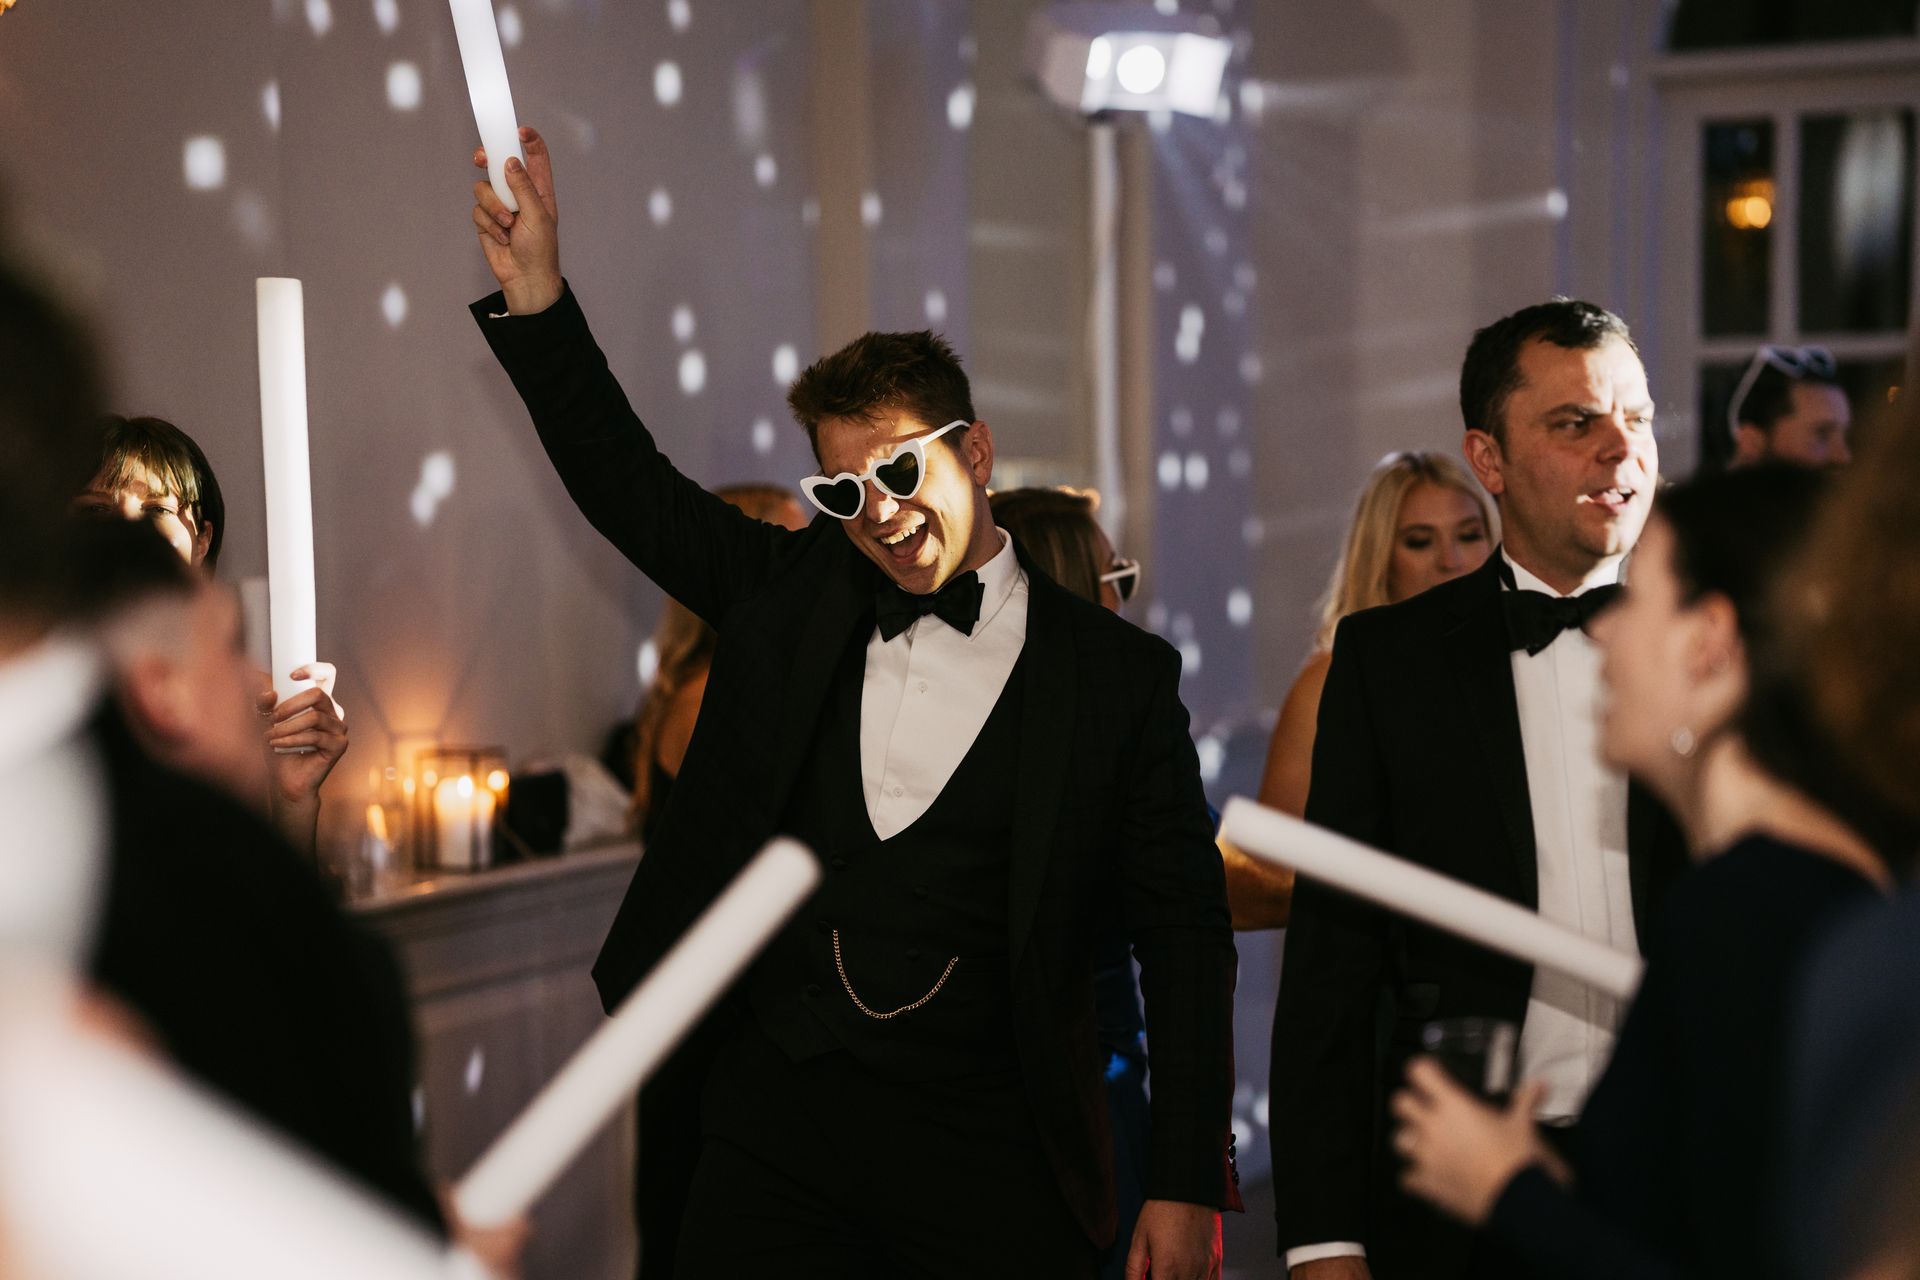 White man in black tuxedo dancing and holding up a white glow stick and wearing white heart sunglasses